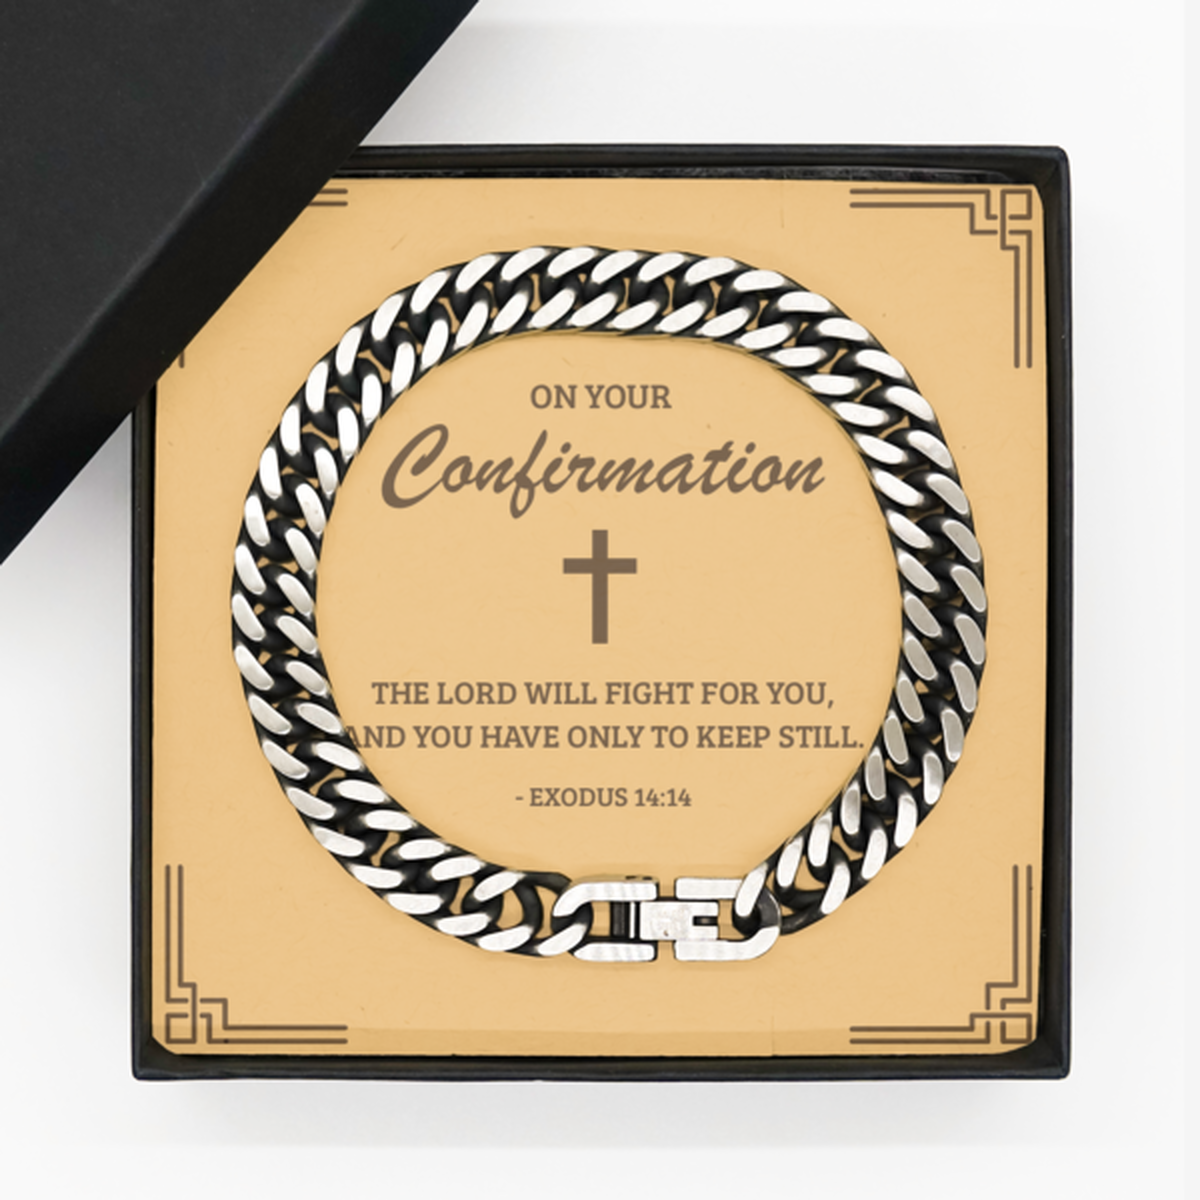 Confirmation Gifts for Teenage Boys, The Lord will fight for you, Cuban Link Chain Bracelet with Bible Verse Message Card, Religious Catholic Bracelet for Son, Grandson, Dad, Godfather